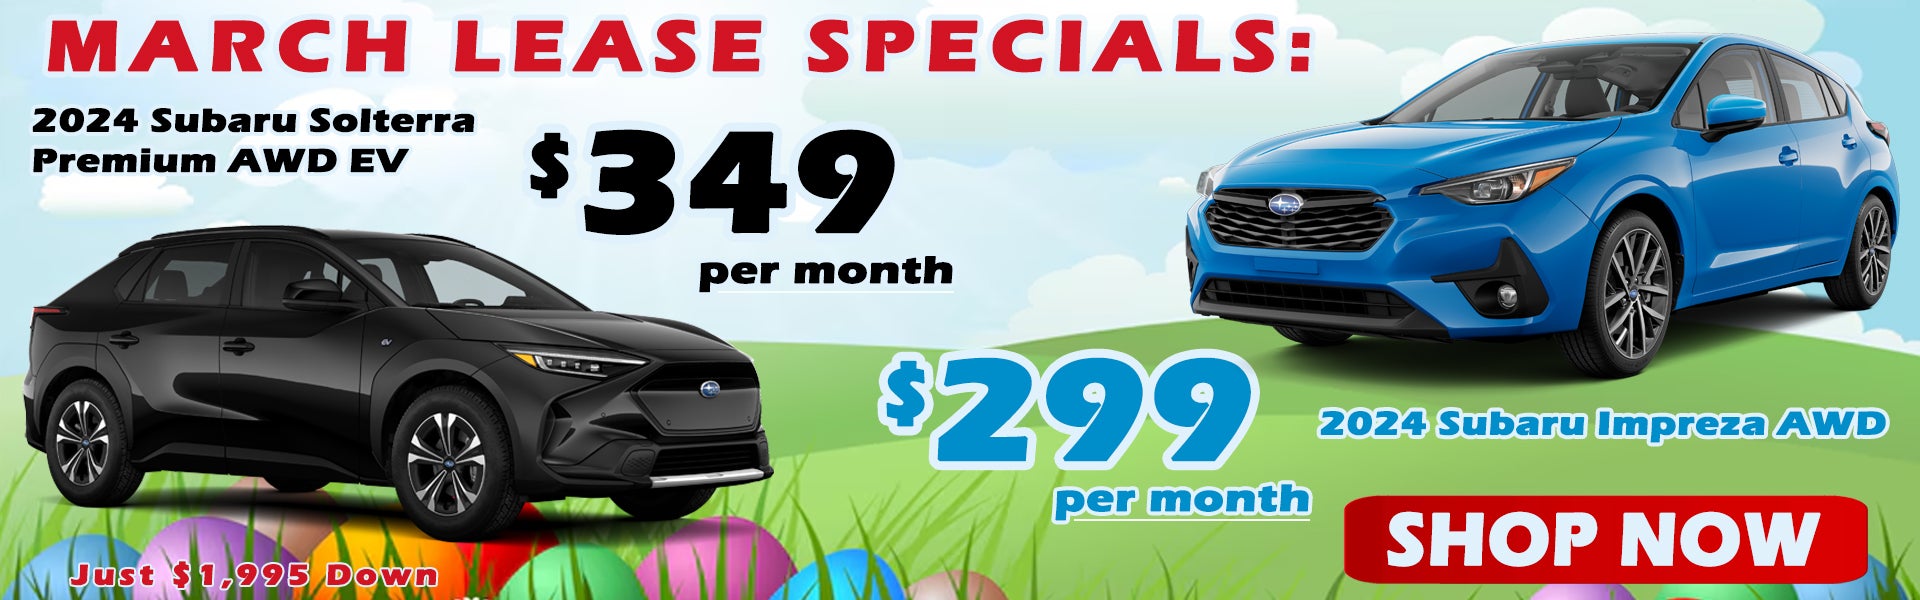 March Lease Specials